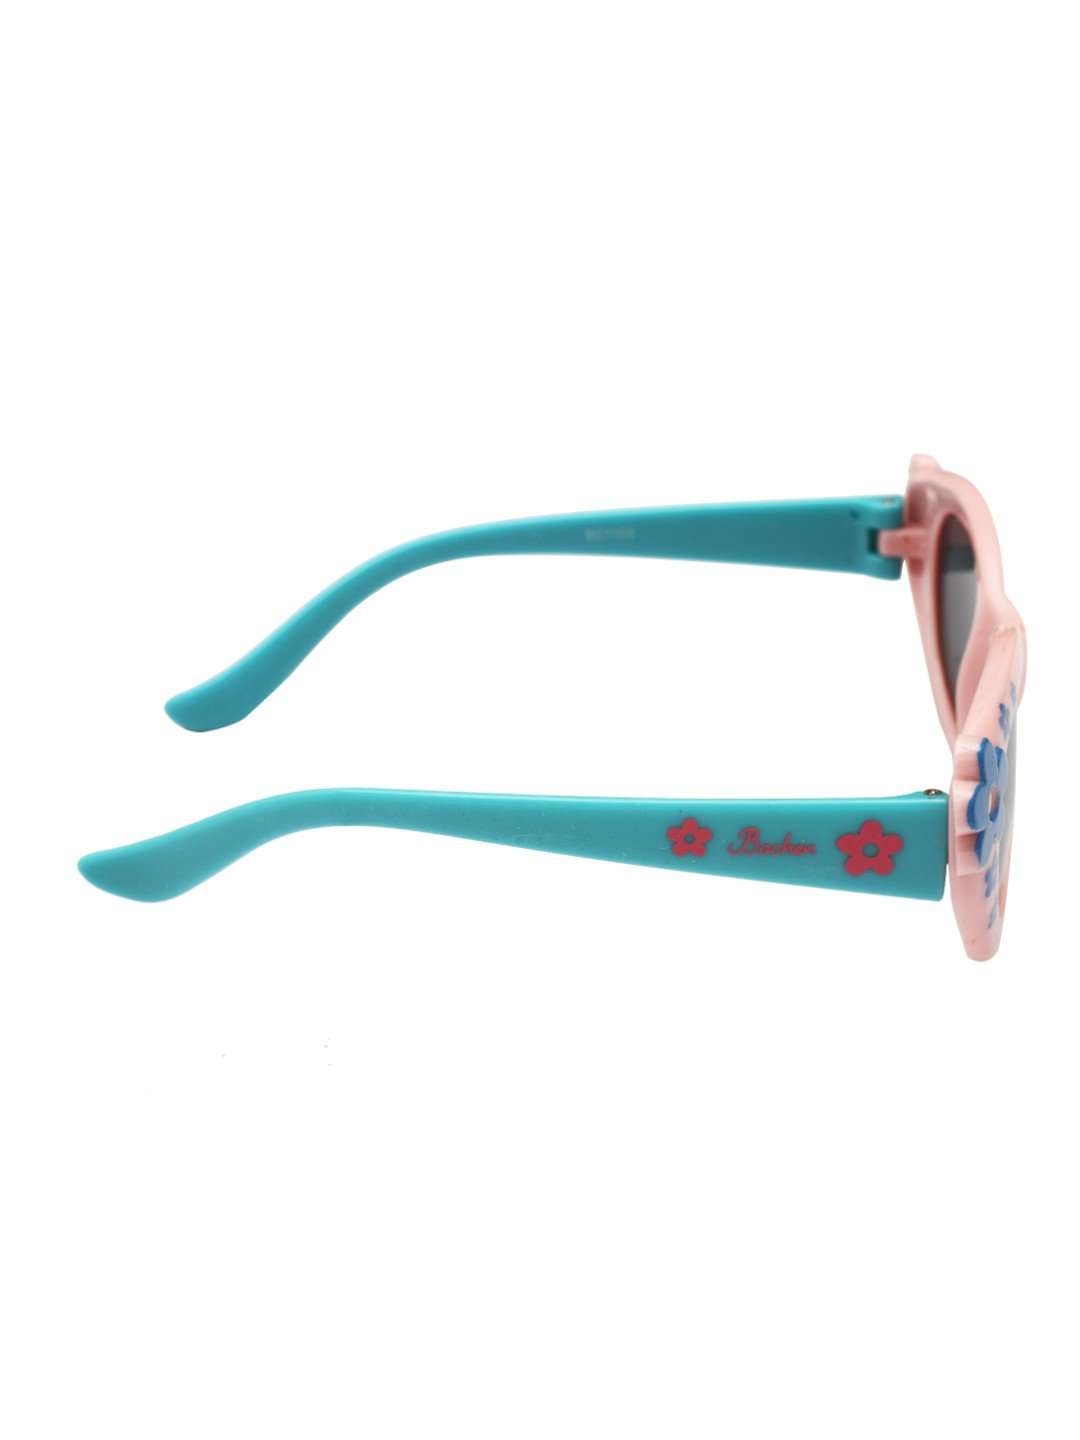 Stol'n Kids Pink and Blue Flower Cat Eye Sunglasses - SWHF